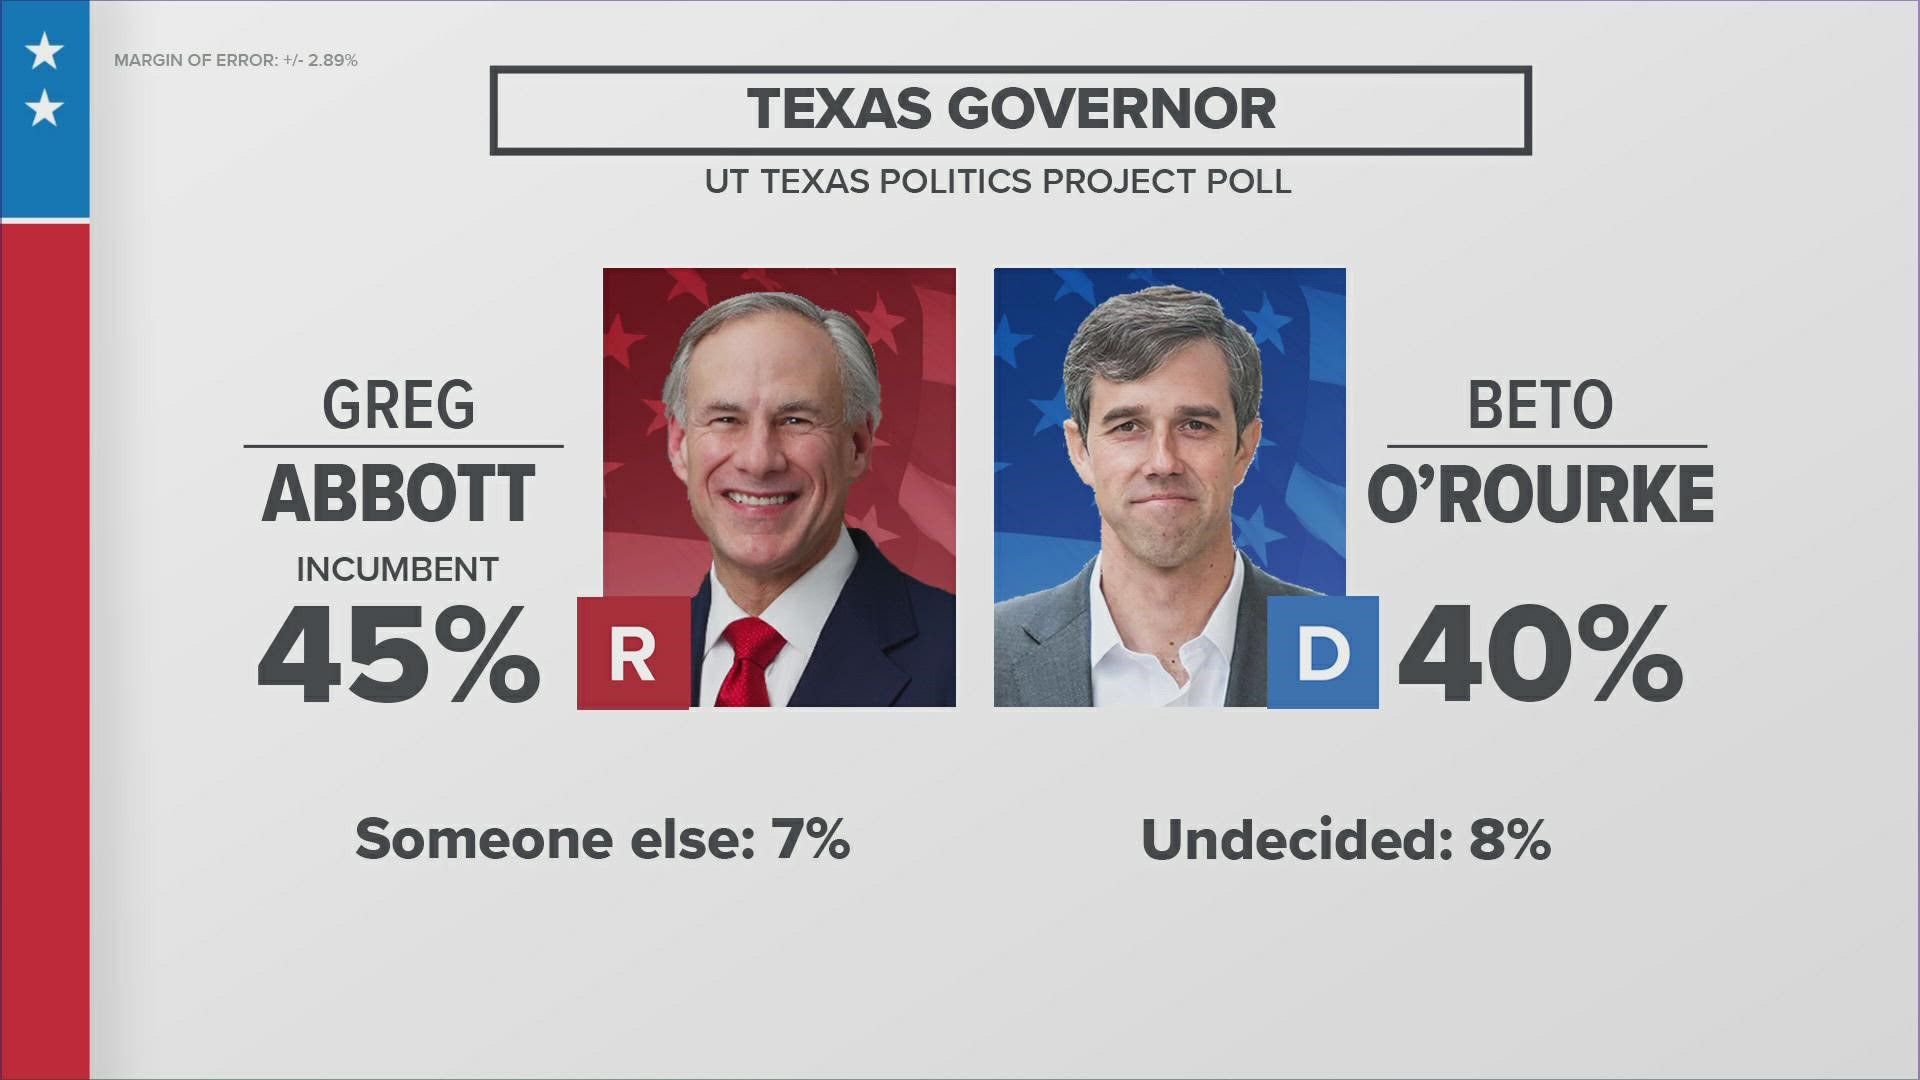 We are less than two months from the November election. Today, the Texas Politics Project released a new poll showing where the candidates stand.